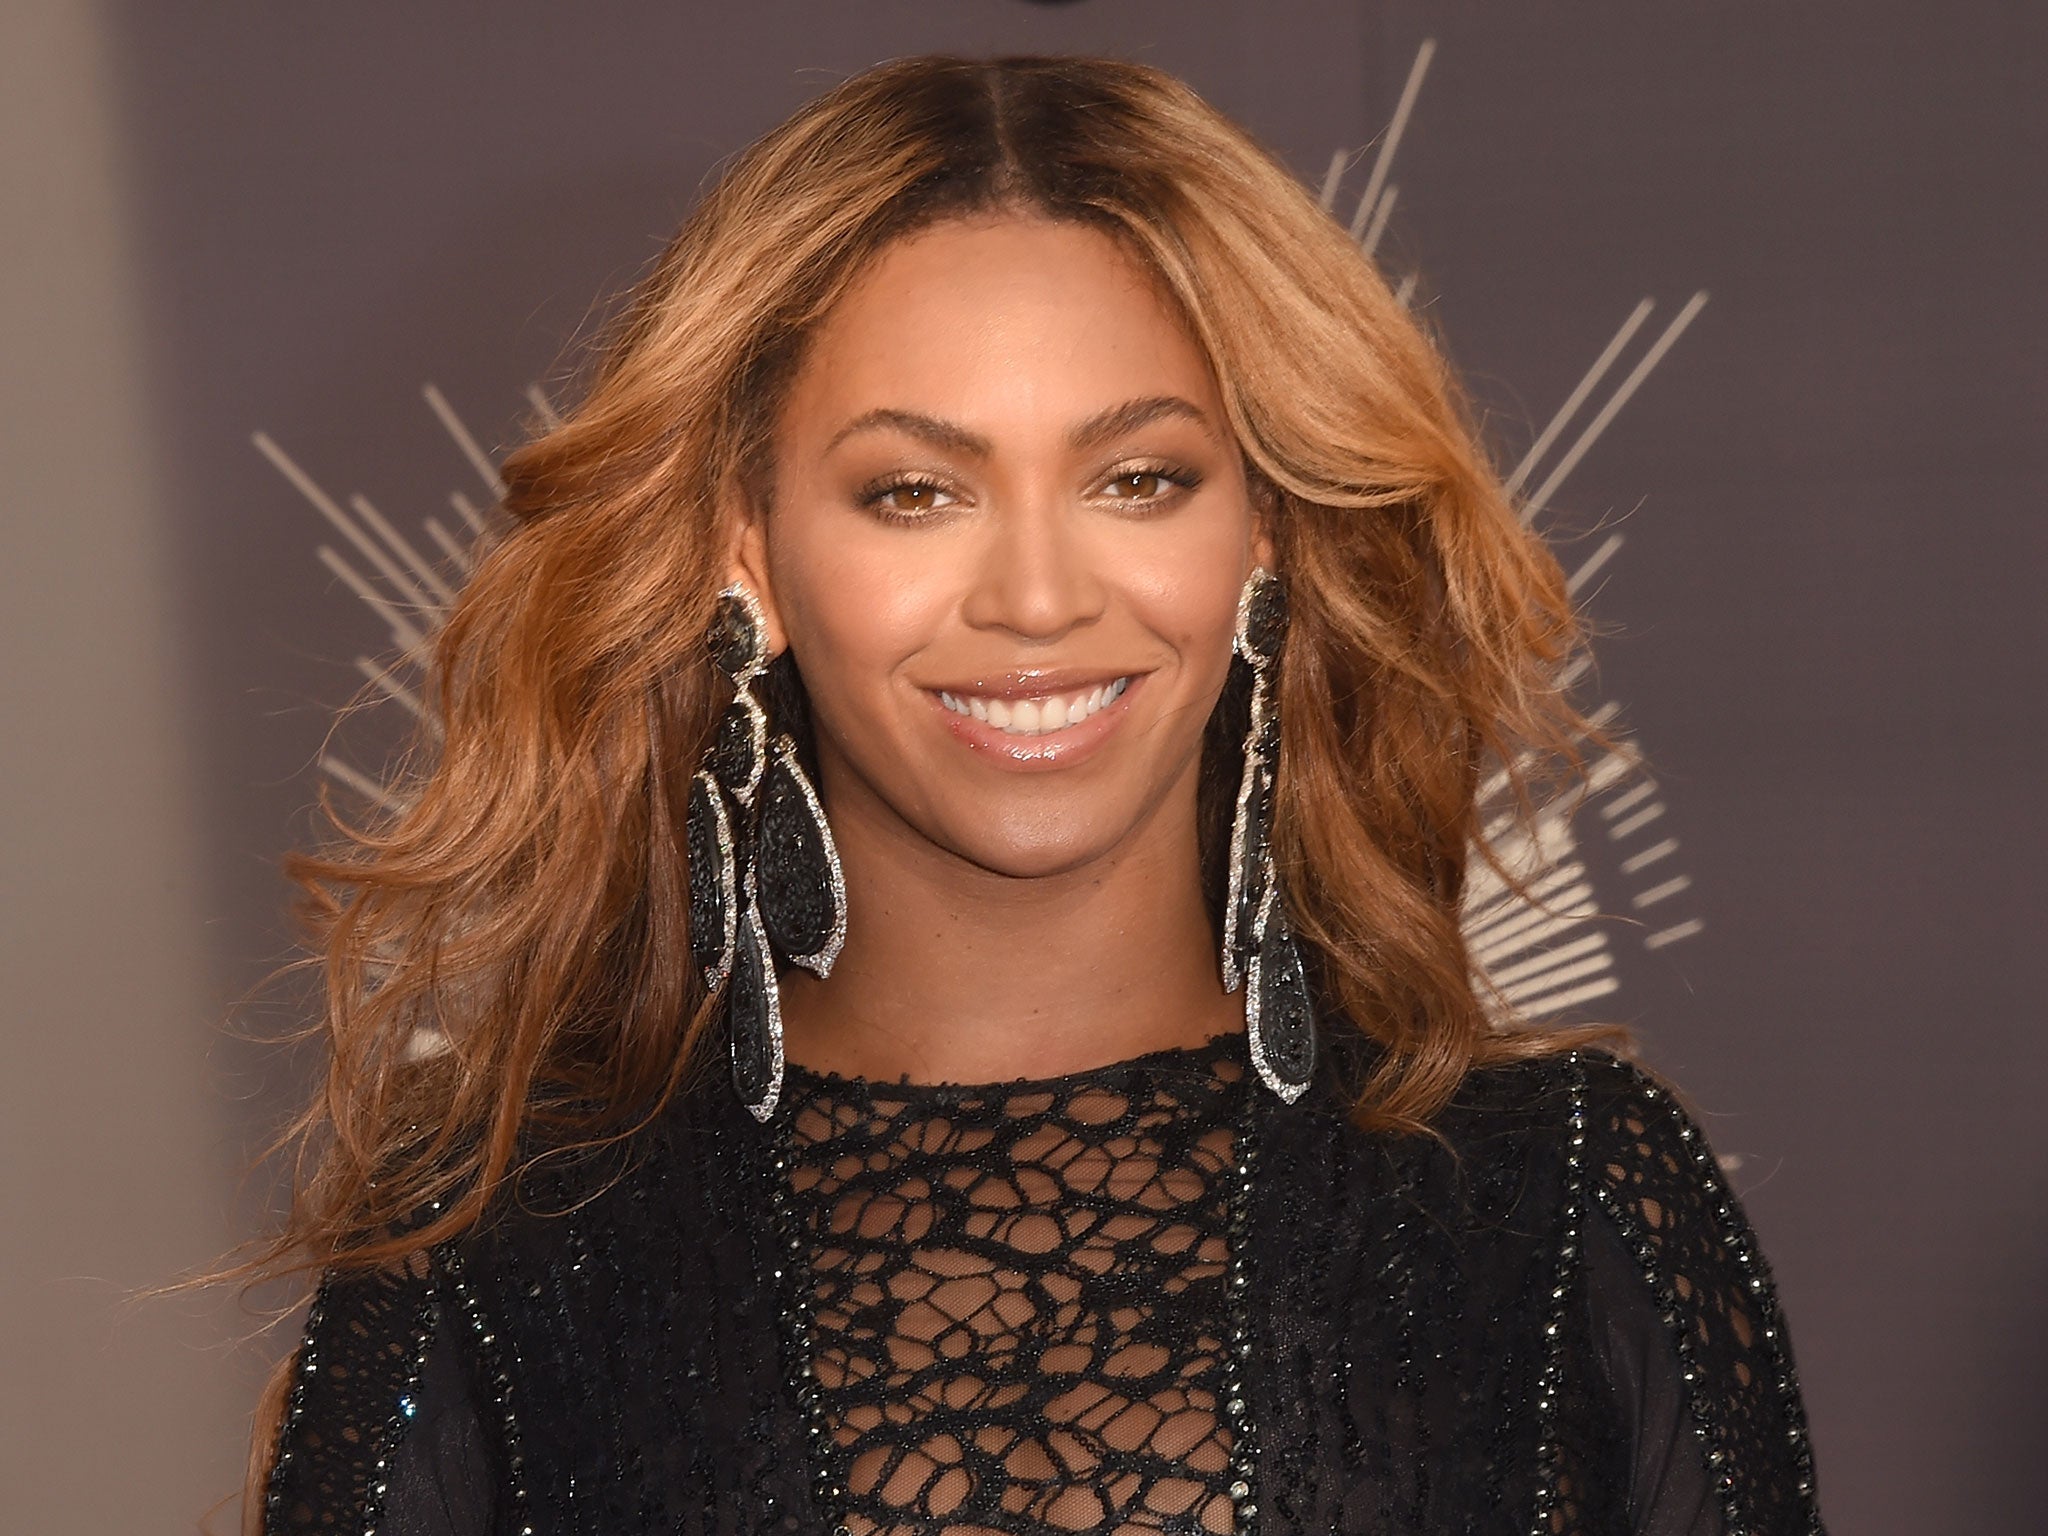 Beyonce has signed an open letter for poverty charity ONE calling for female empowerment